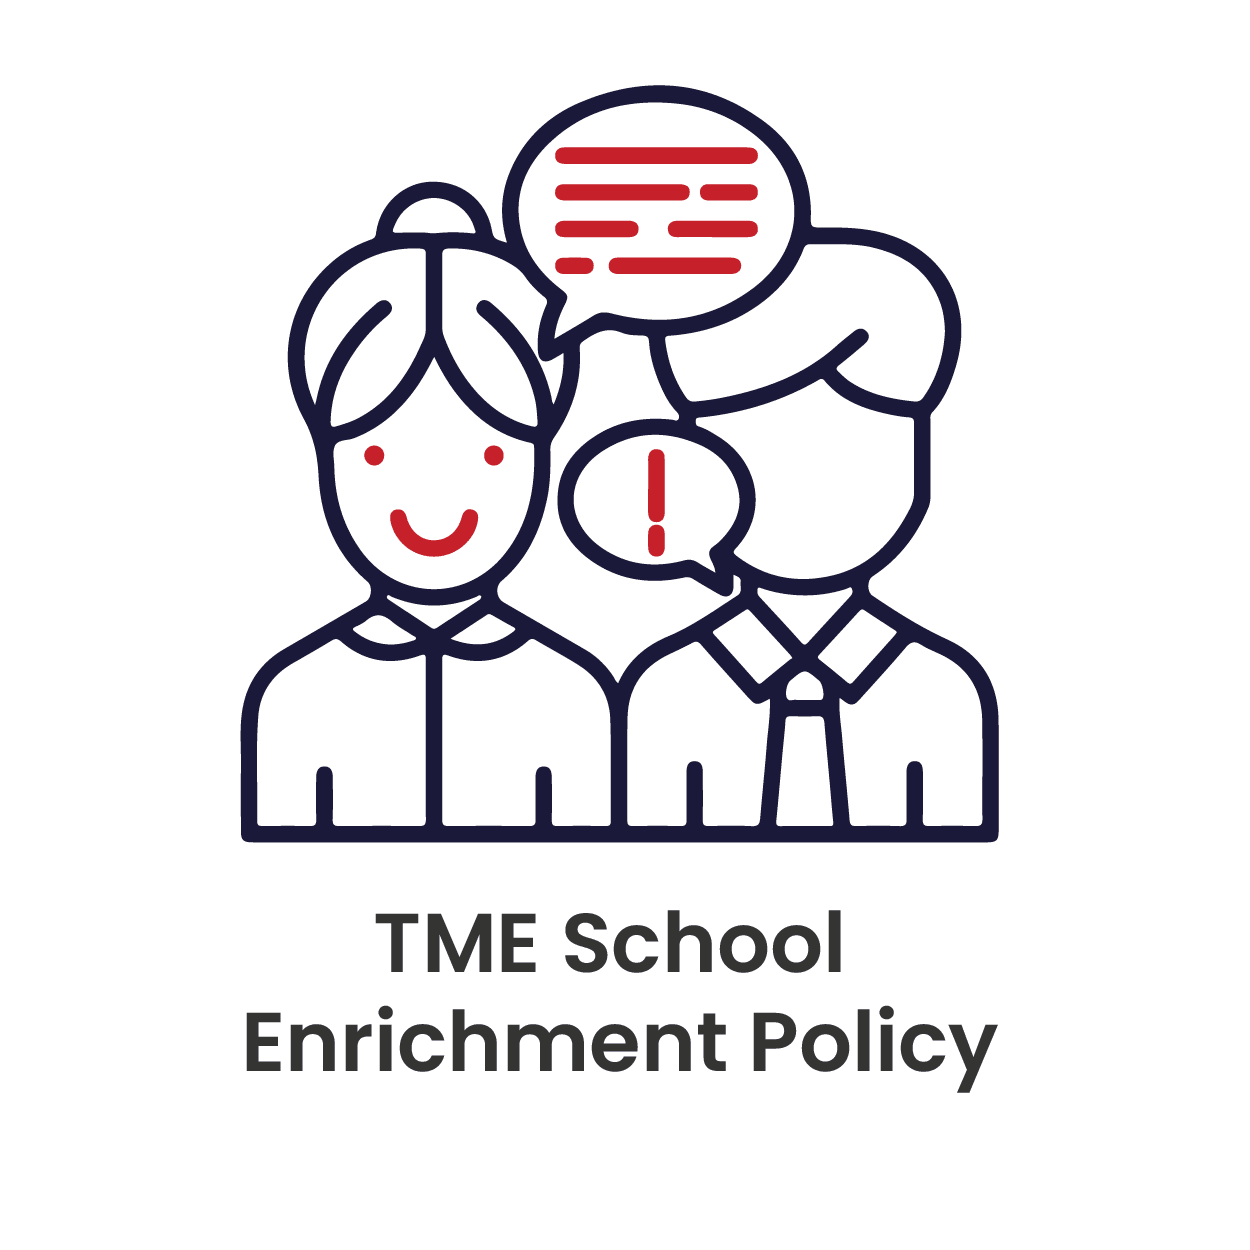 Top school roots millennium provides equal opportunity policy to all students